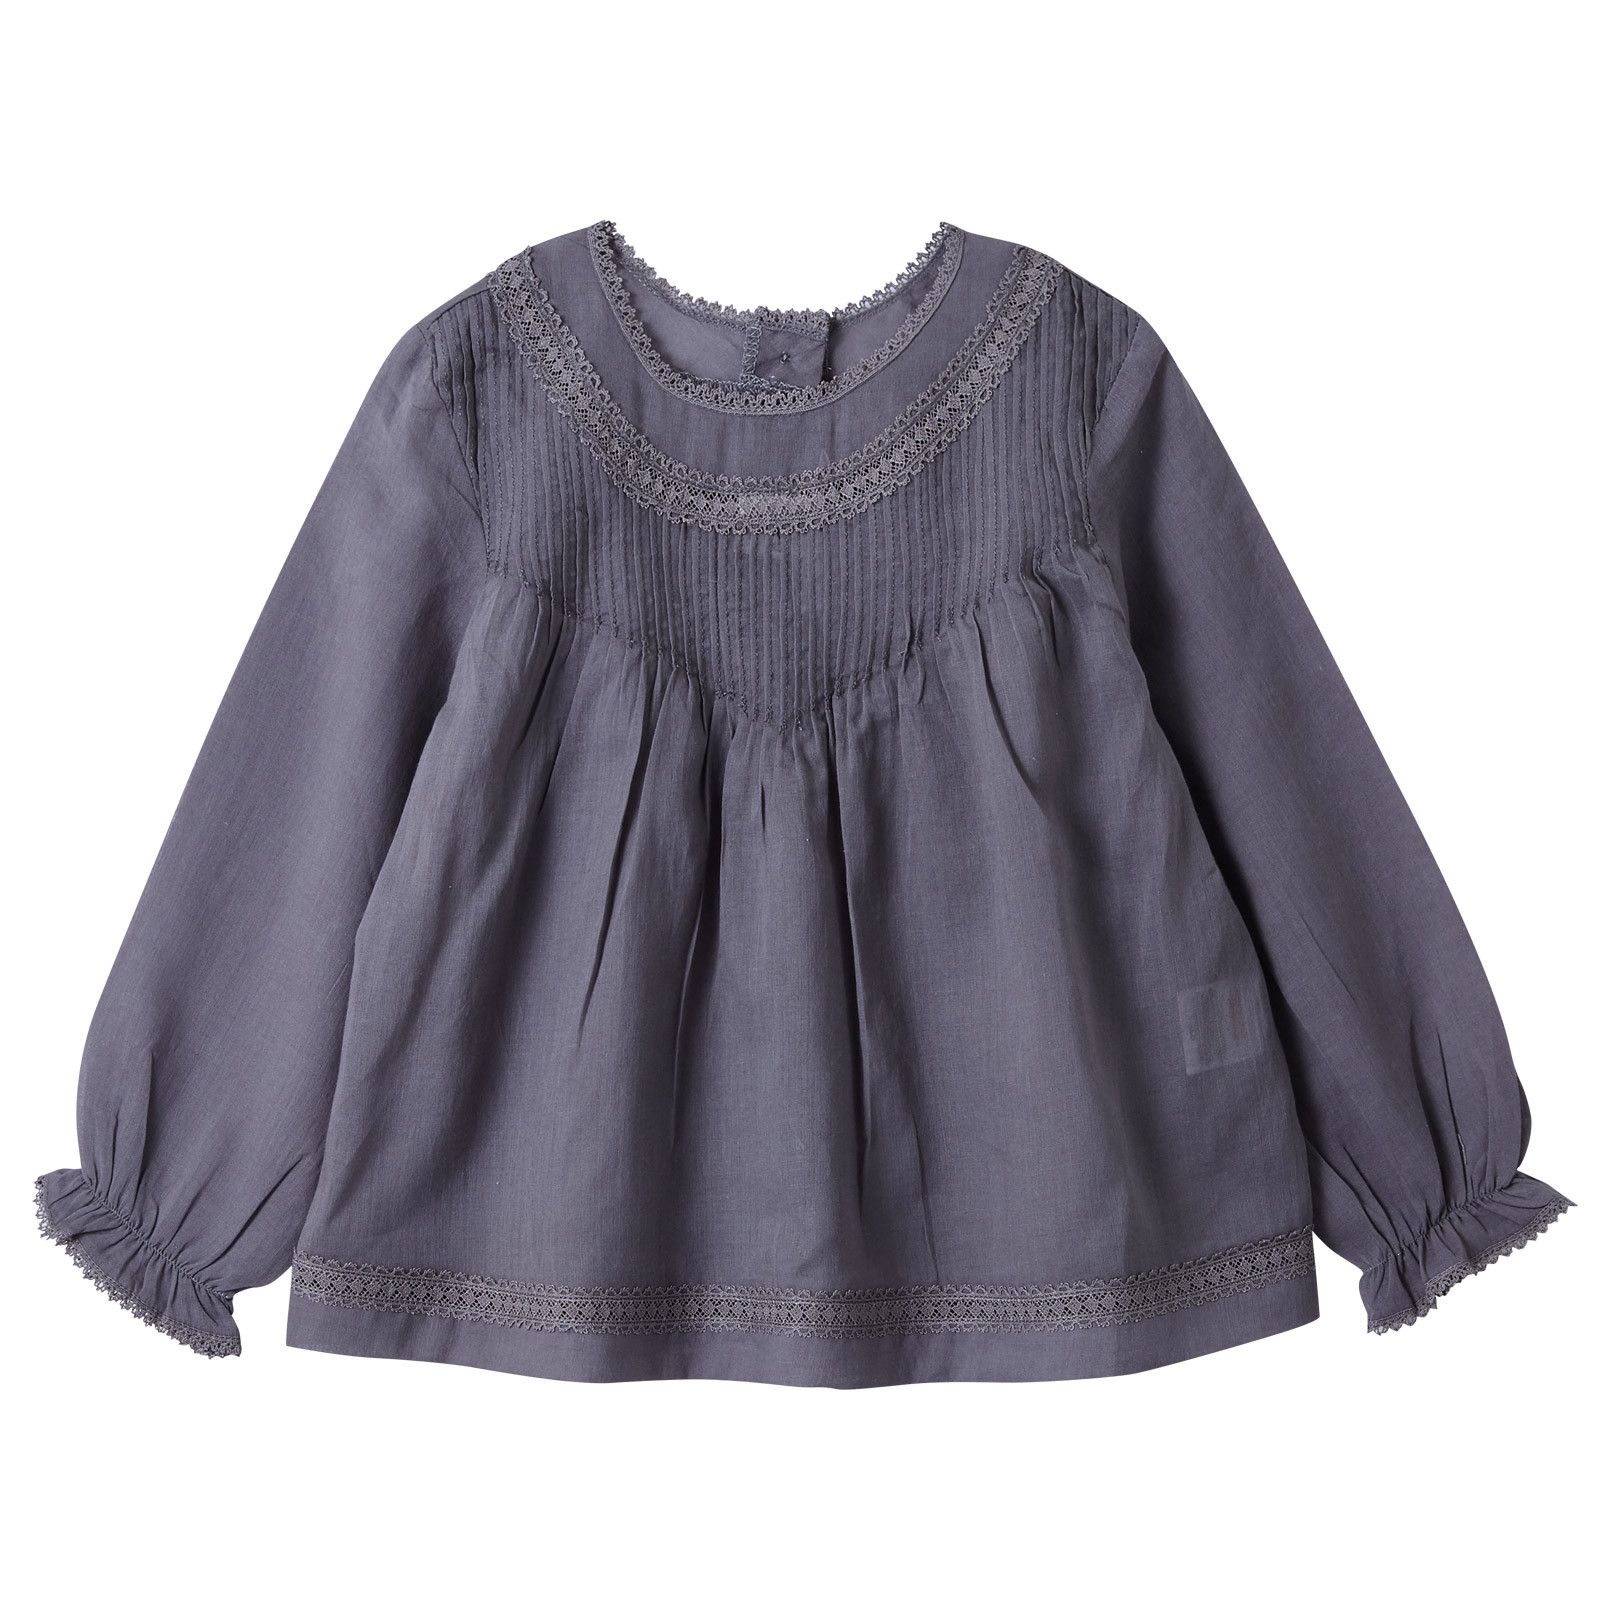 Baby Girls Grey Folk Blouse With Frilly Cuffs - CÉMAROSE | Children's Fashion Store - 1